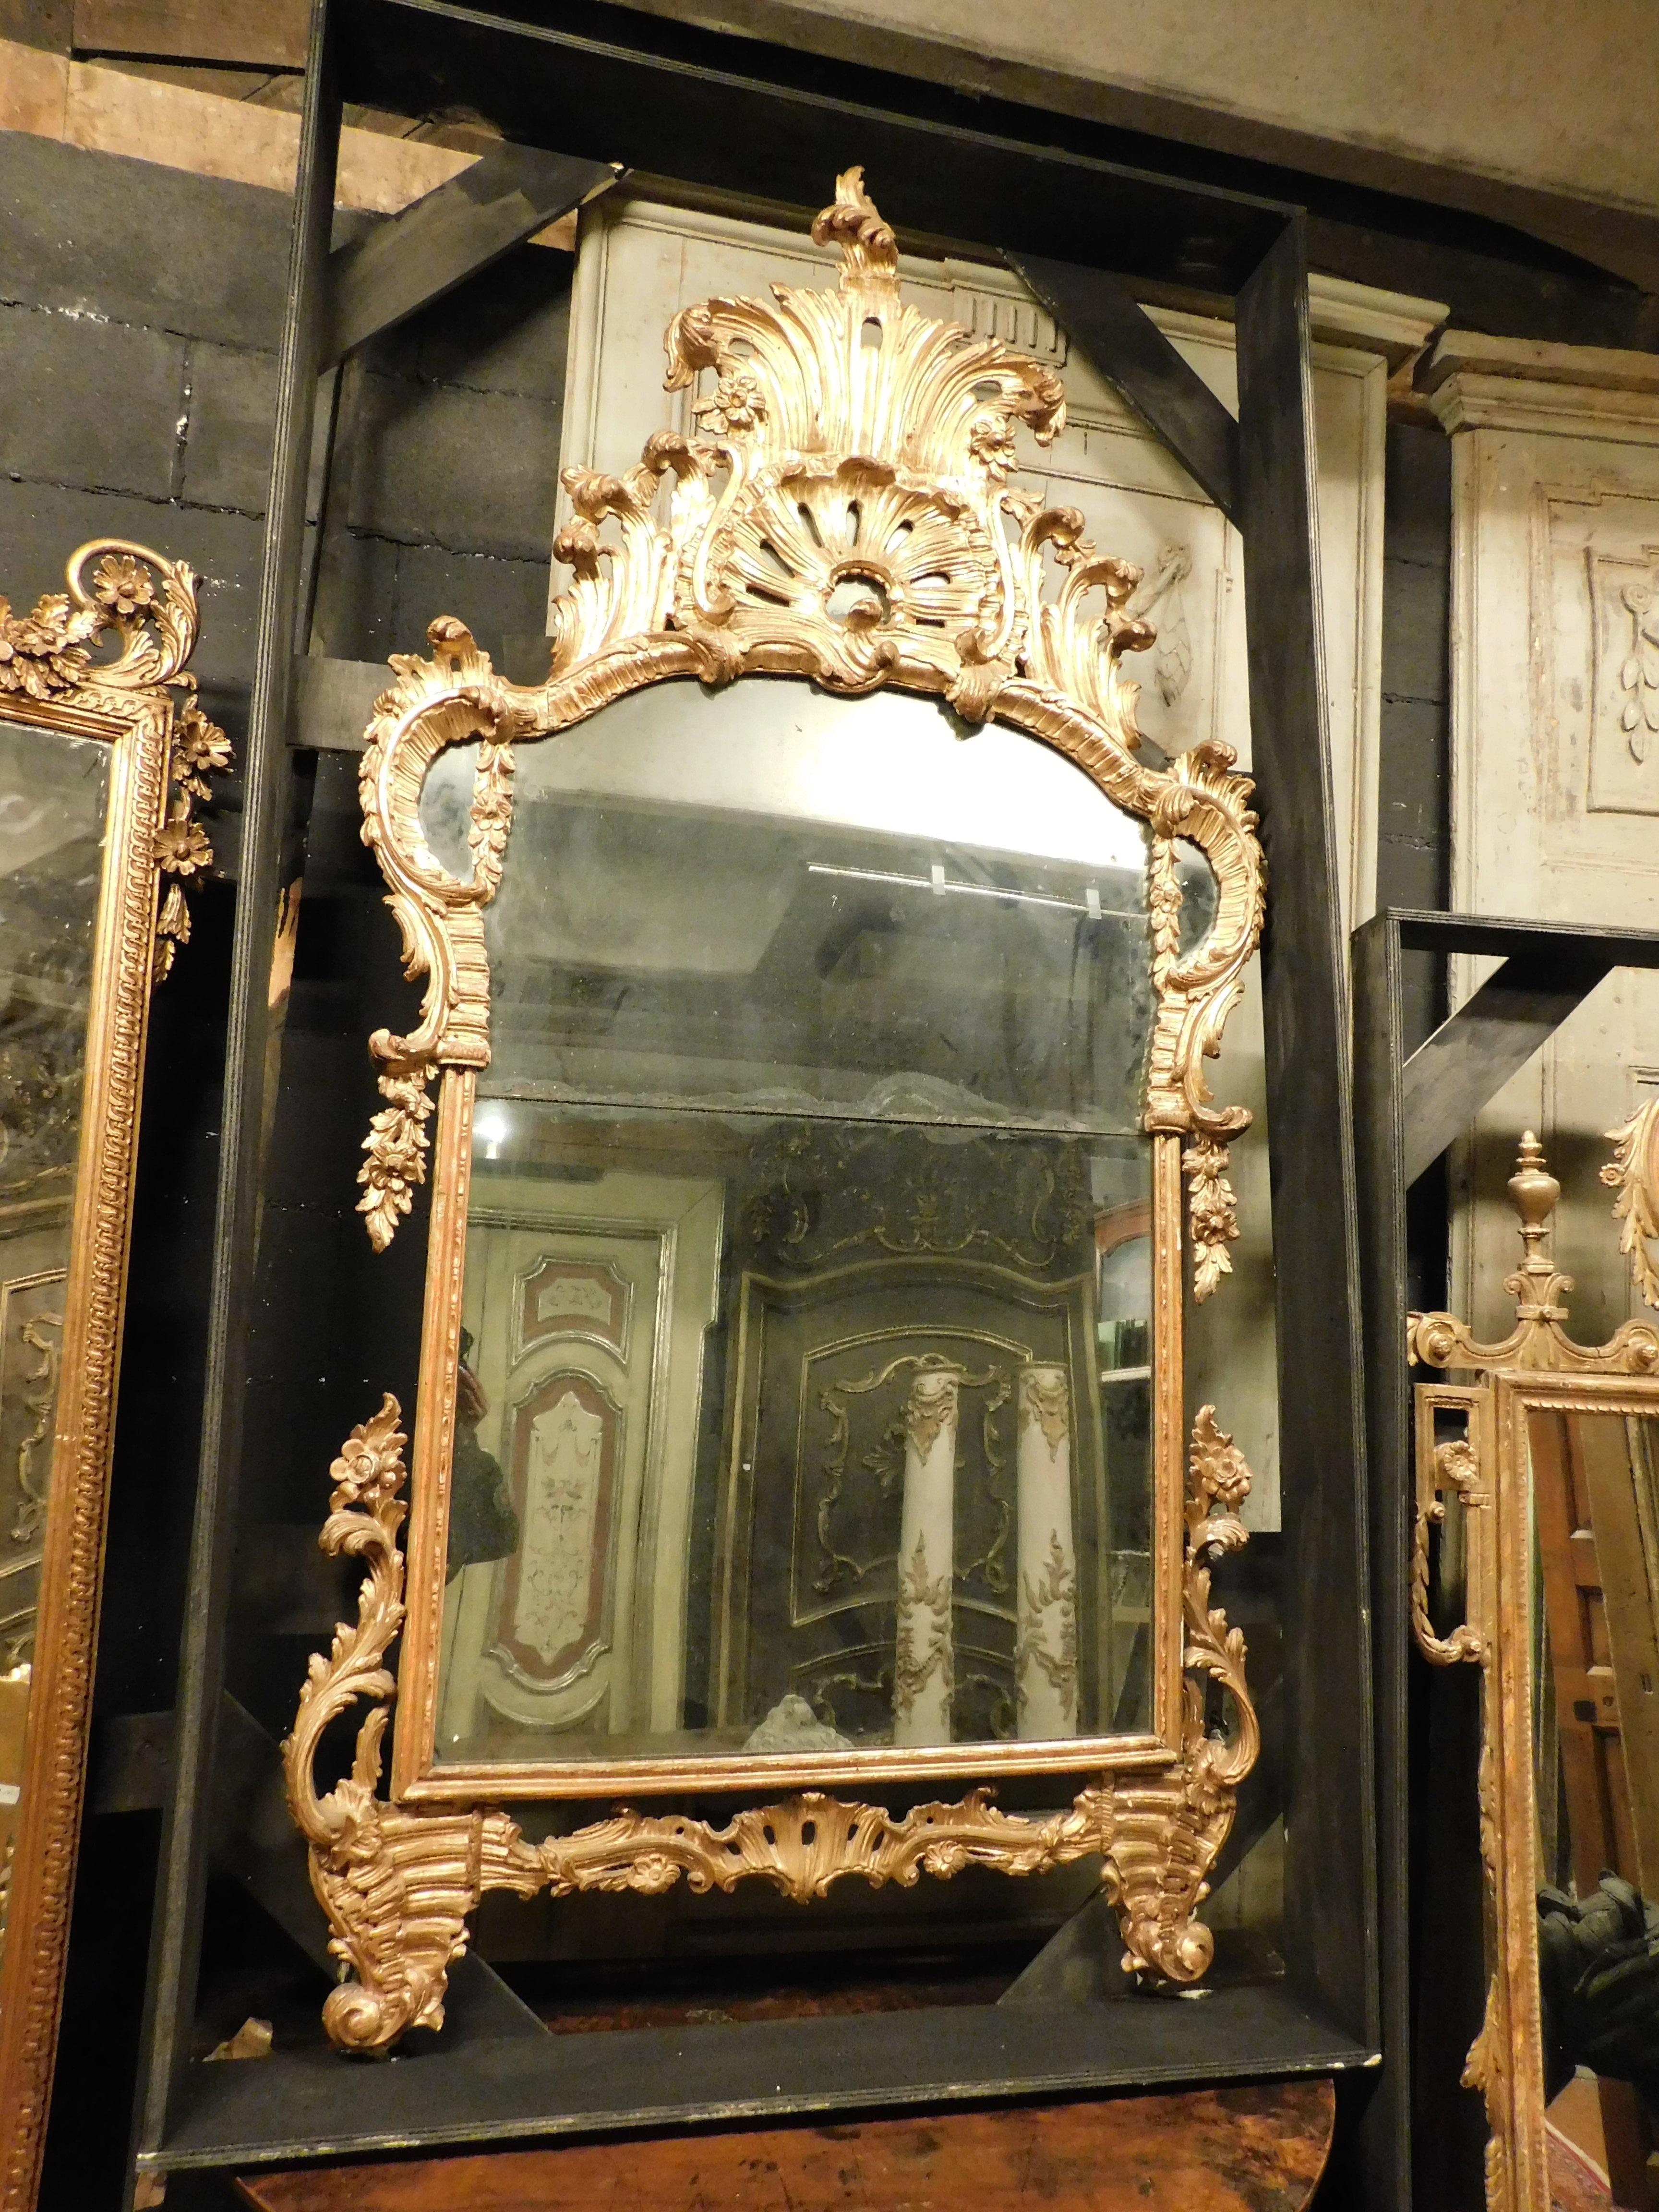 Ancient, antique and important free-standing mirror, mirror with gilded wooden frame and richly carved cymatium with baroque volutes, original mirror, built in Italy, from the 18th century, from Piedmont, great historical and original ancient